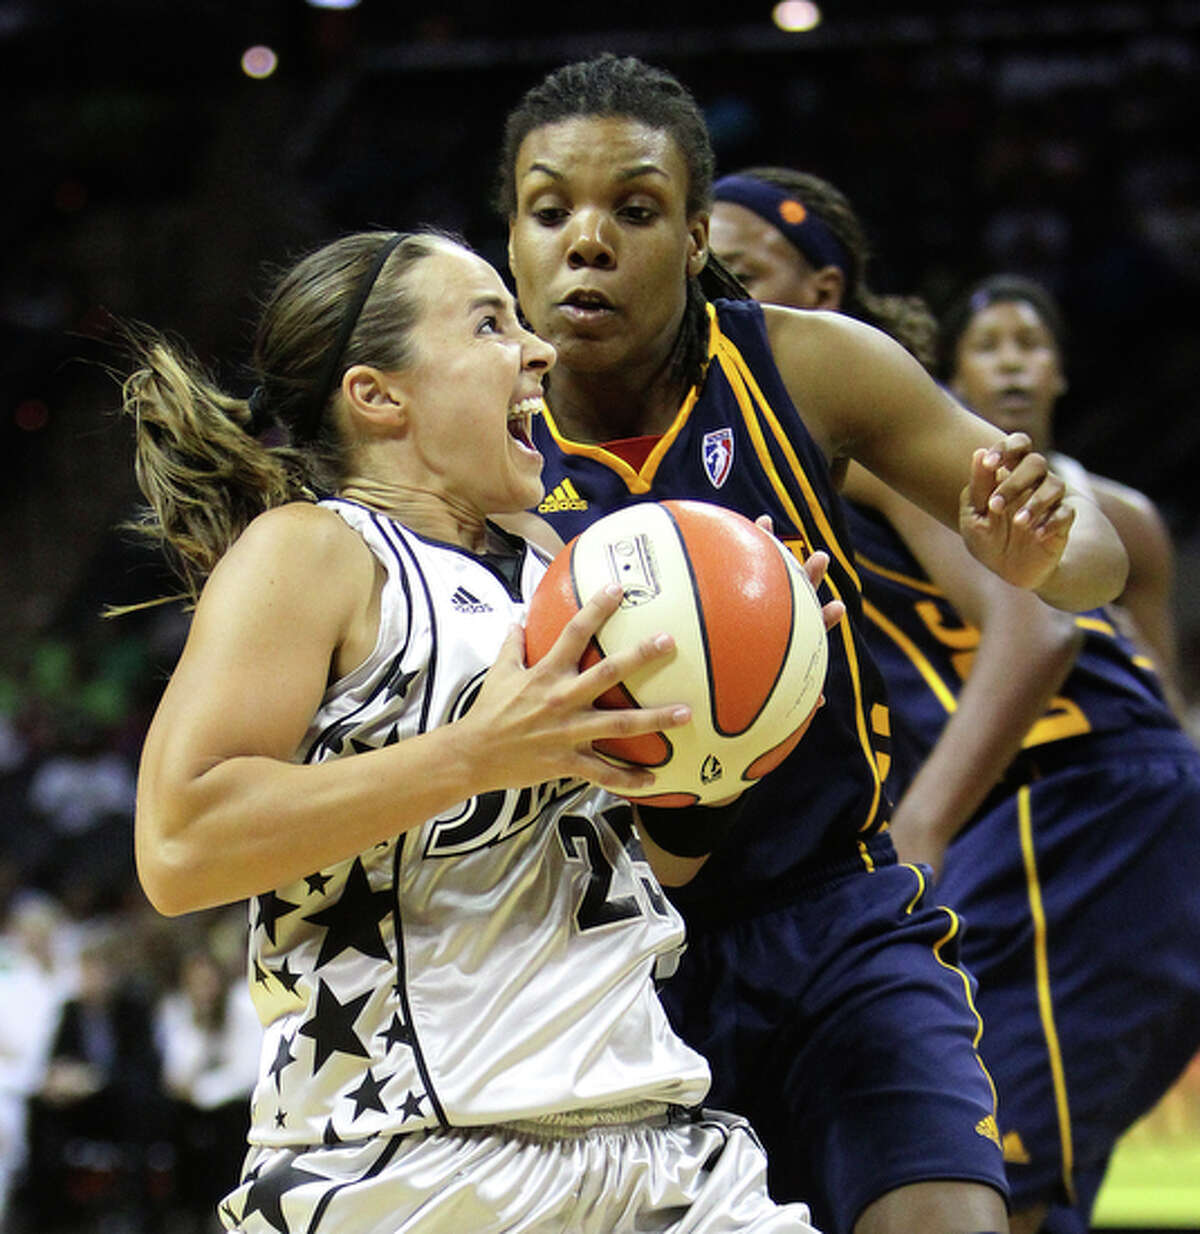 The San Antonio Silver Stars' Becky Hammon (25) drives to the basket against the Connecticut Suns' Tan White (14).